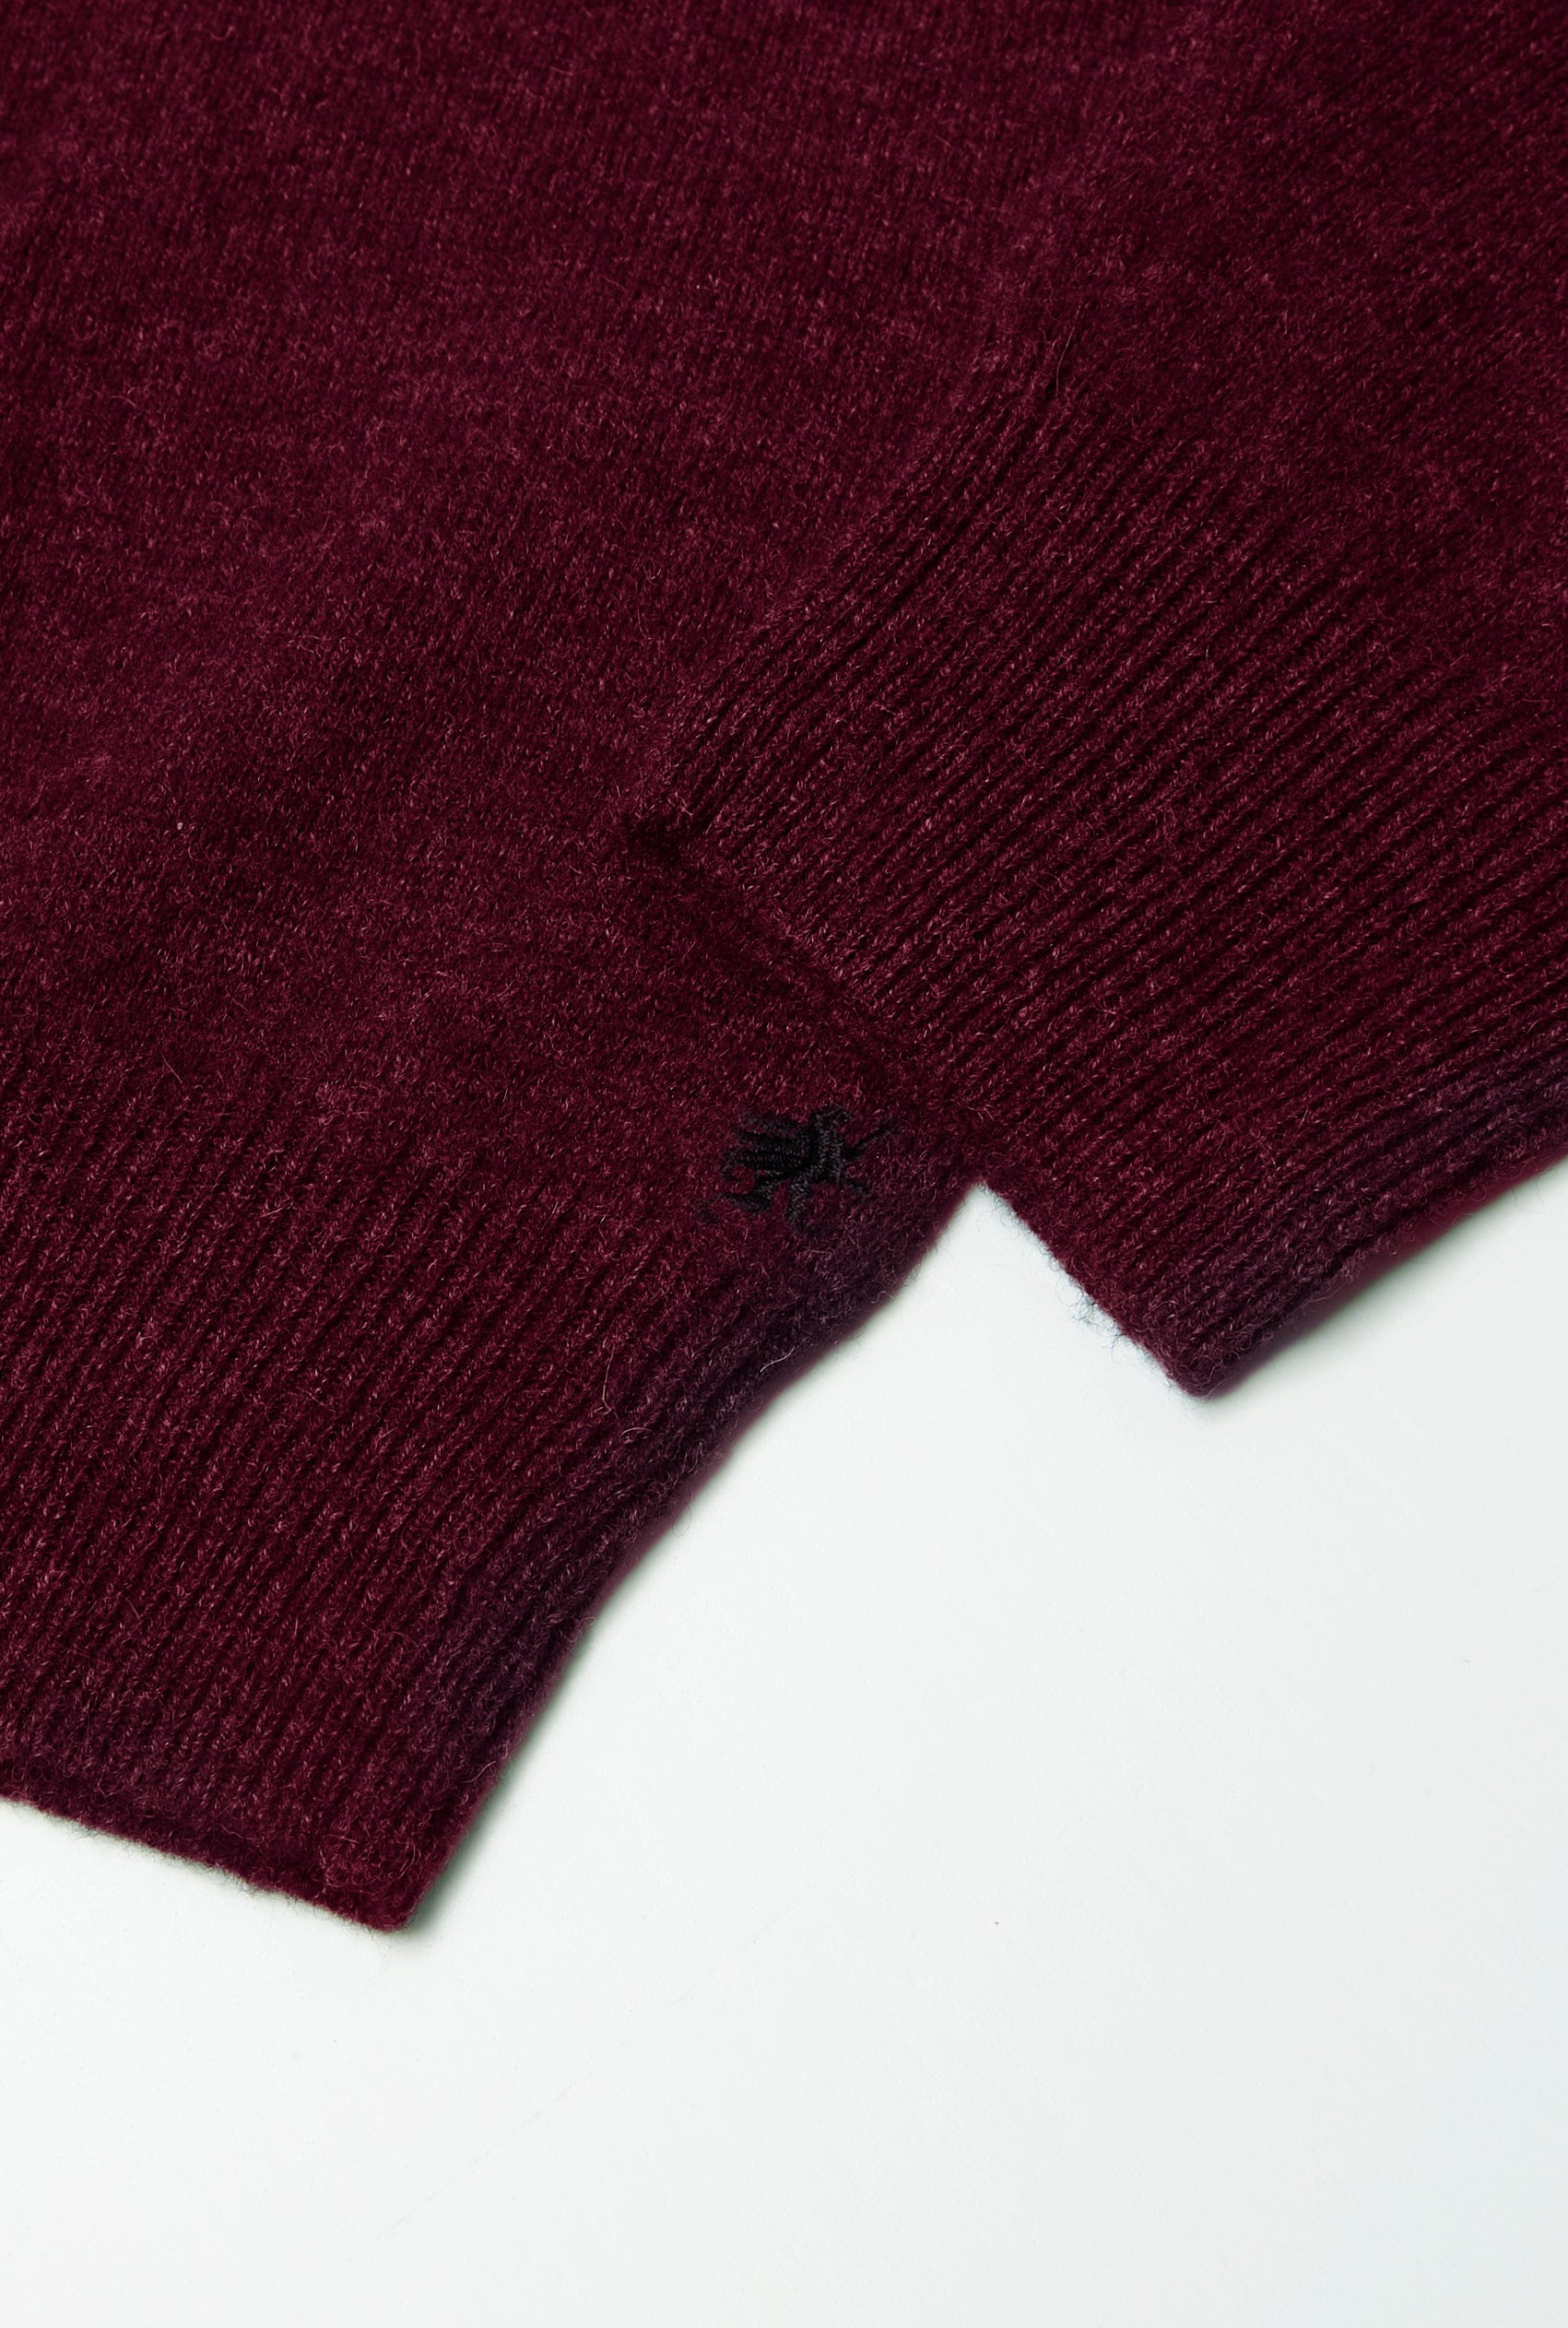 Lambswool Crew Neck in Red